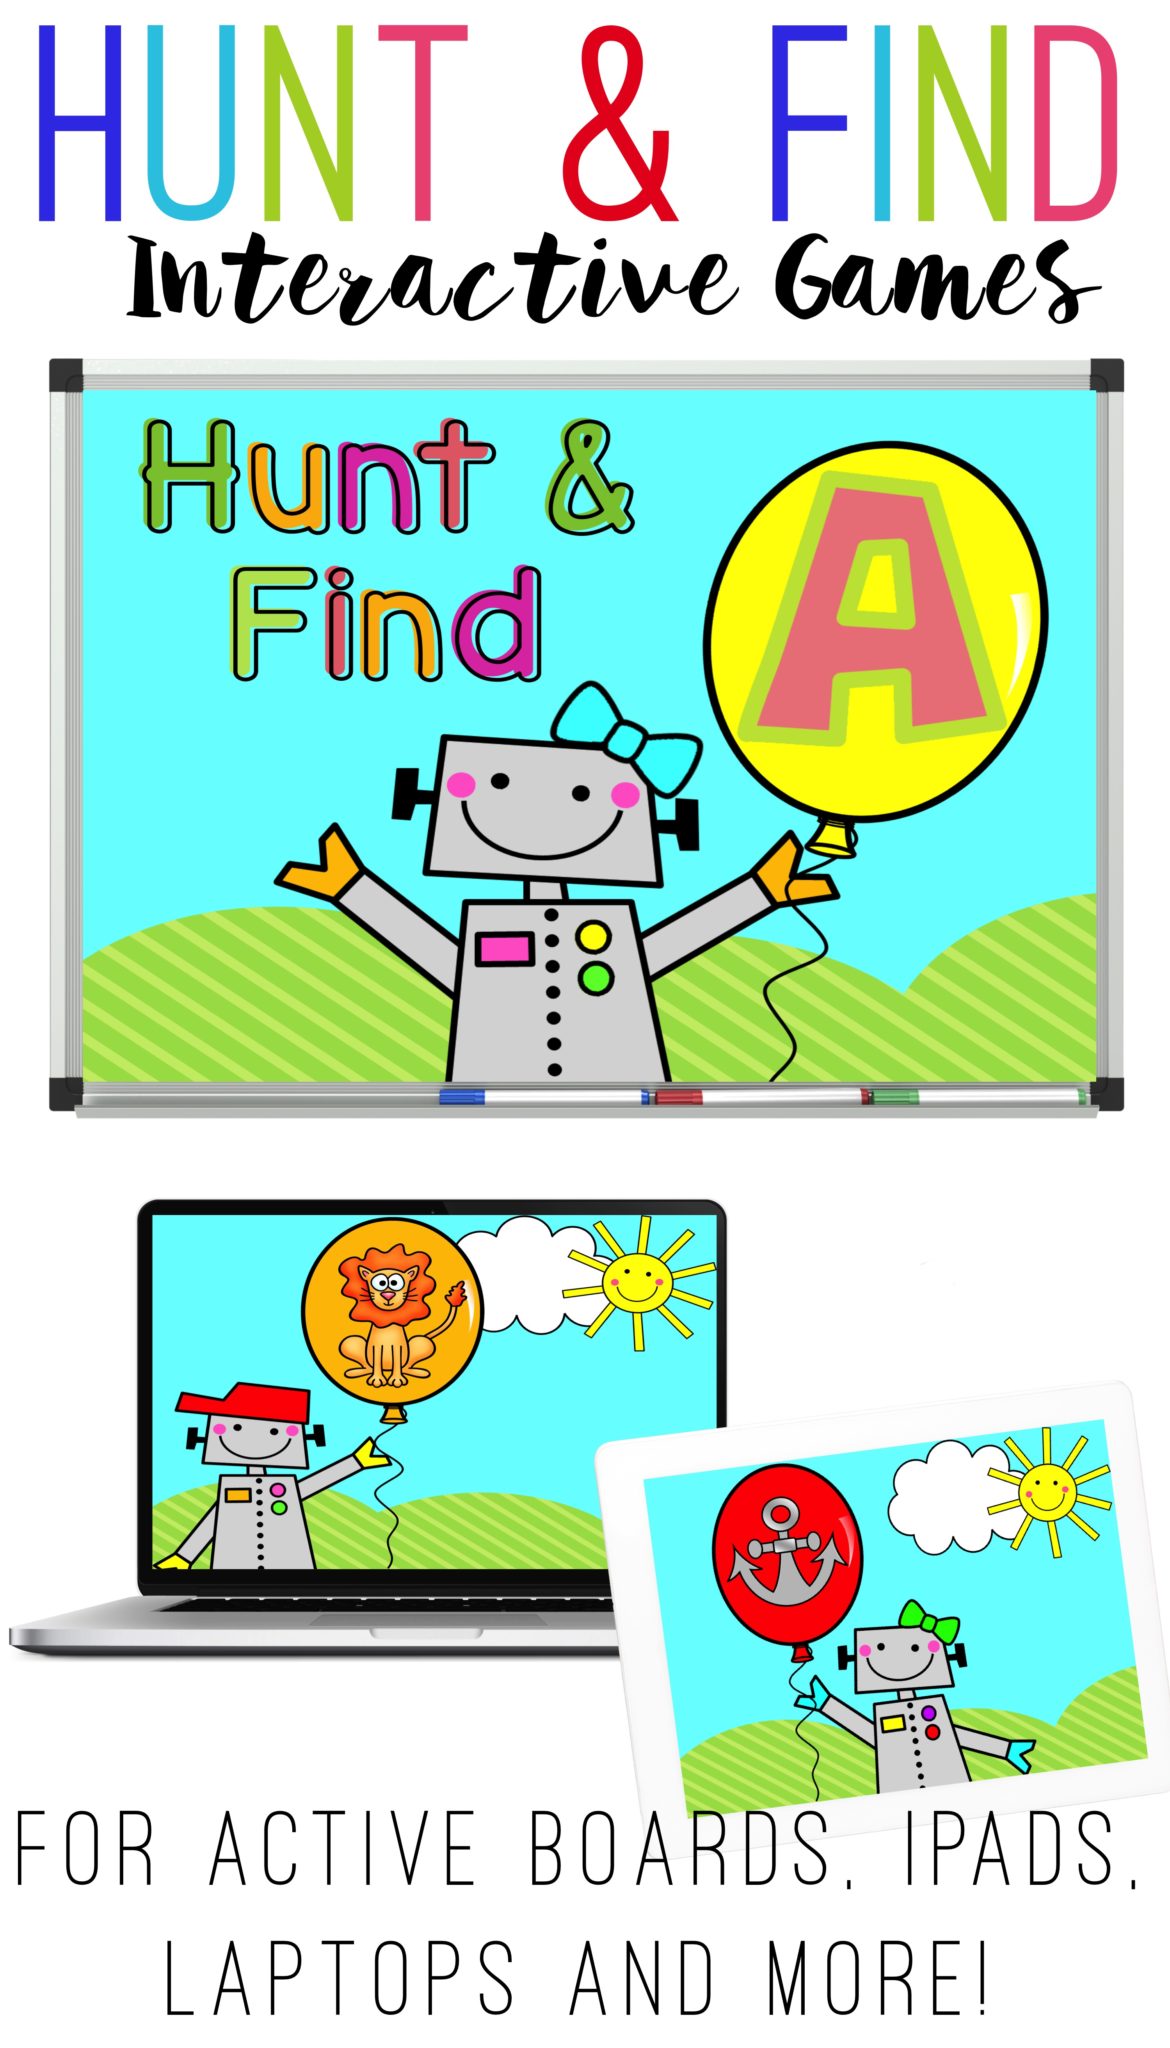 Hunt and Find games for Active Boards, Computers, and iPads